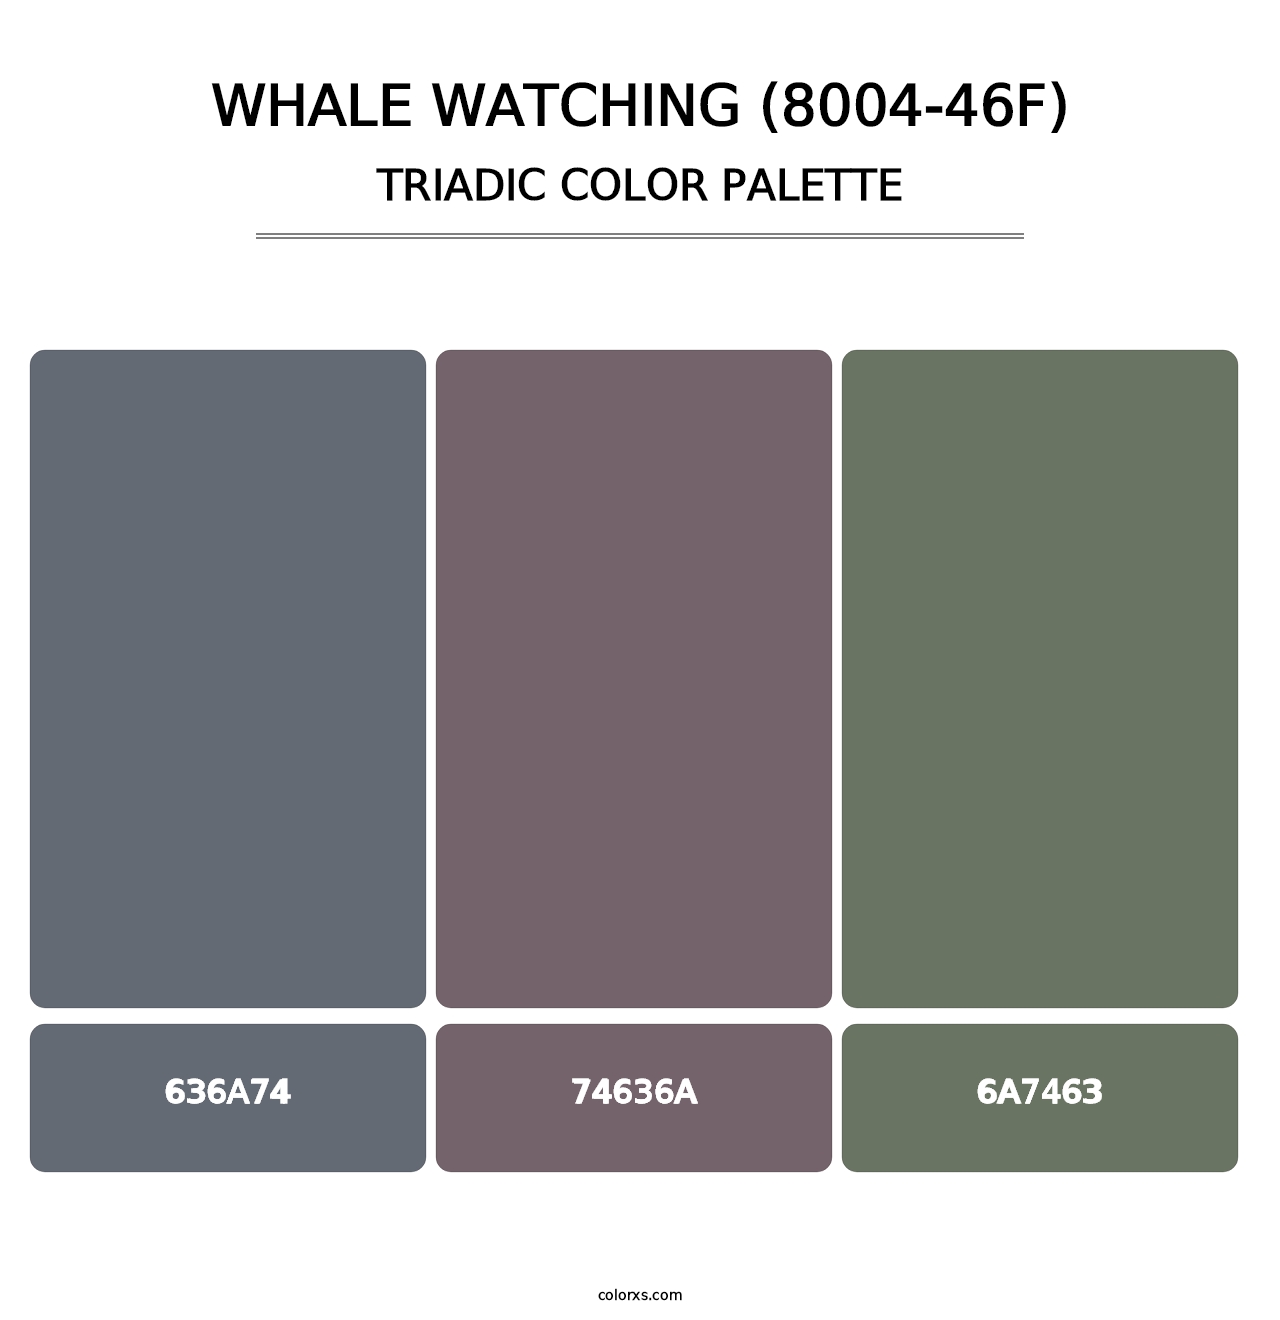 Whale Watching (8004-46F) - Triadic Color Palette